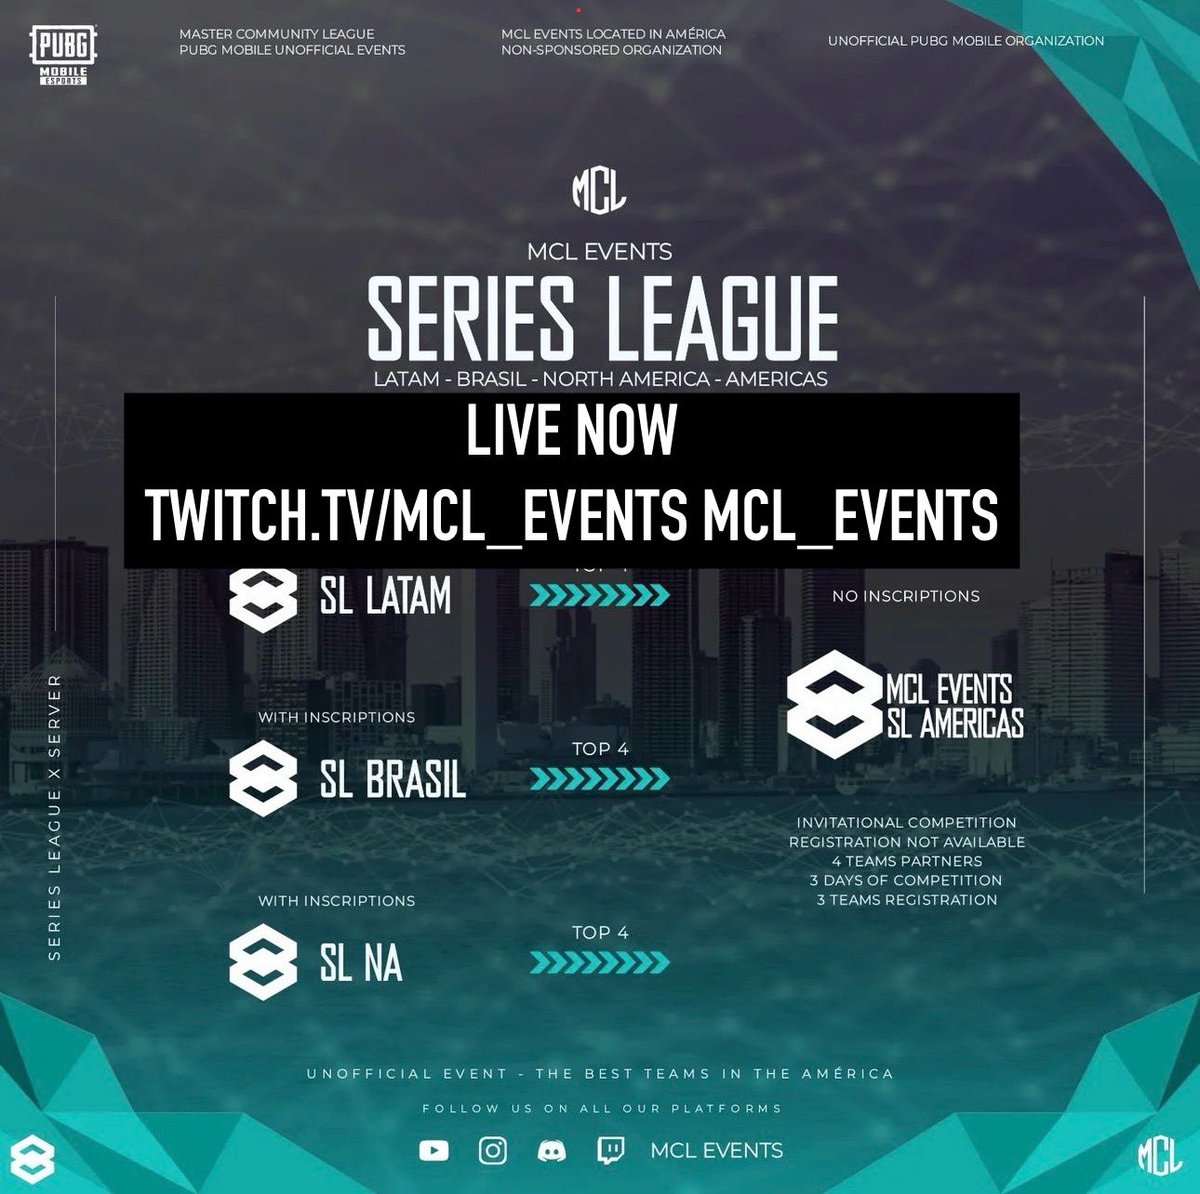 LIVE NOW for the @PUBGMOBILE MCL Series League: SUPER WEEKEND! Only on TWITCH.TV/MCL_EVENTS #PUBGMOBILE #PUBGMVIP #redeyescasting #redeyespubgm #esports #pubgmobileesports @esportspubgmna @PUBGMOBILE_NA_